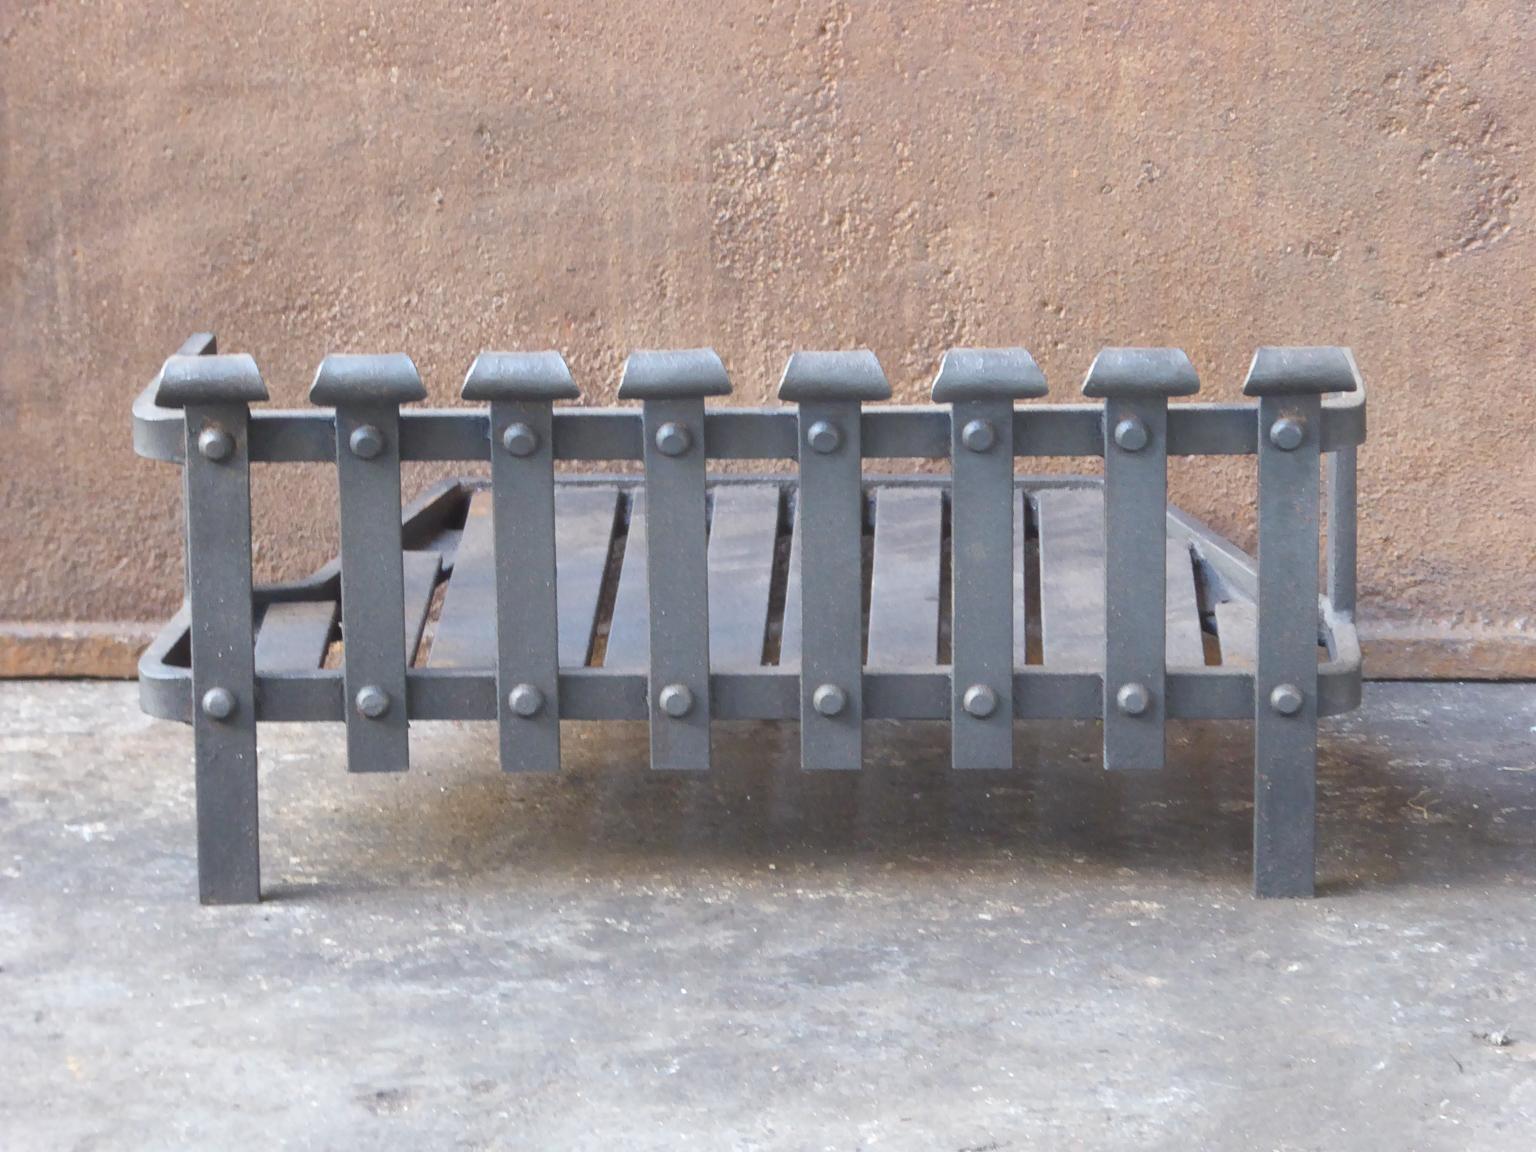 English modernist fireplace basket or fire basket. The fireplace grate is made of wrought iron. The total width of the front of the grate is 20 inch (51 cm).

















